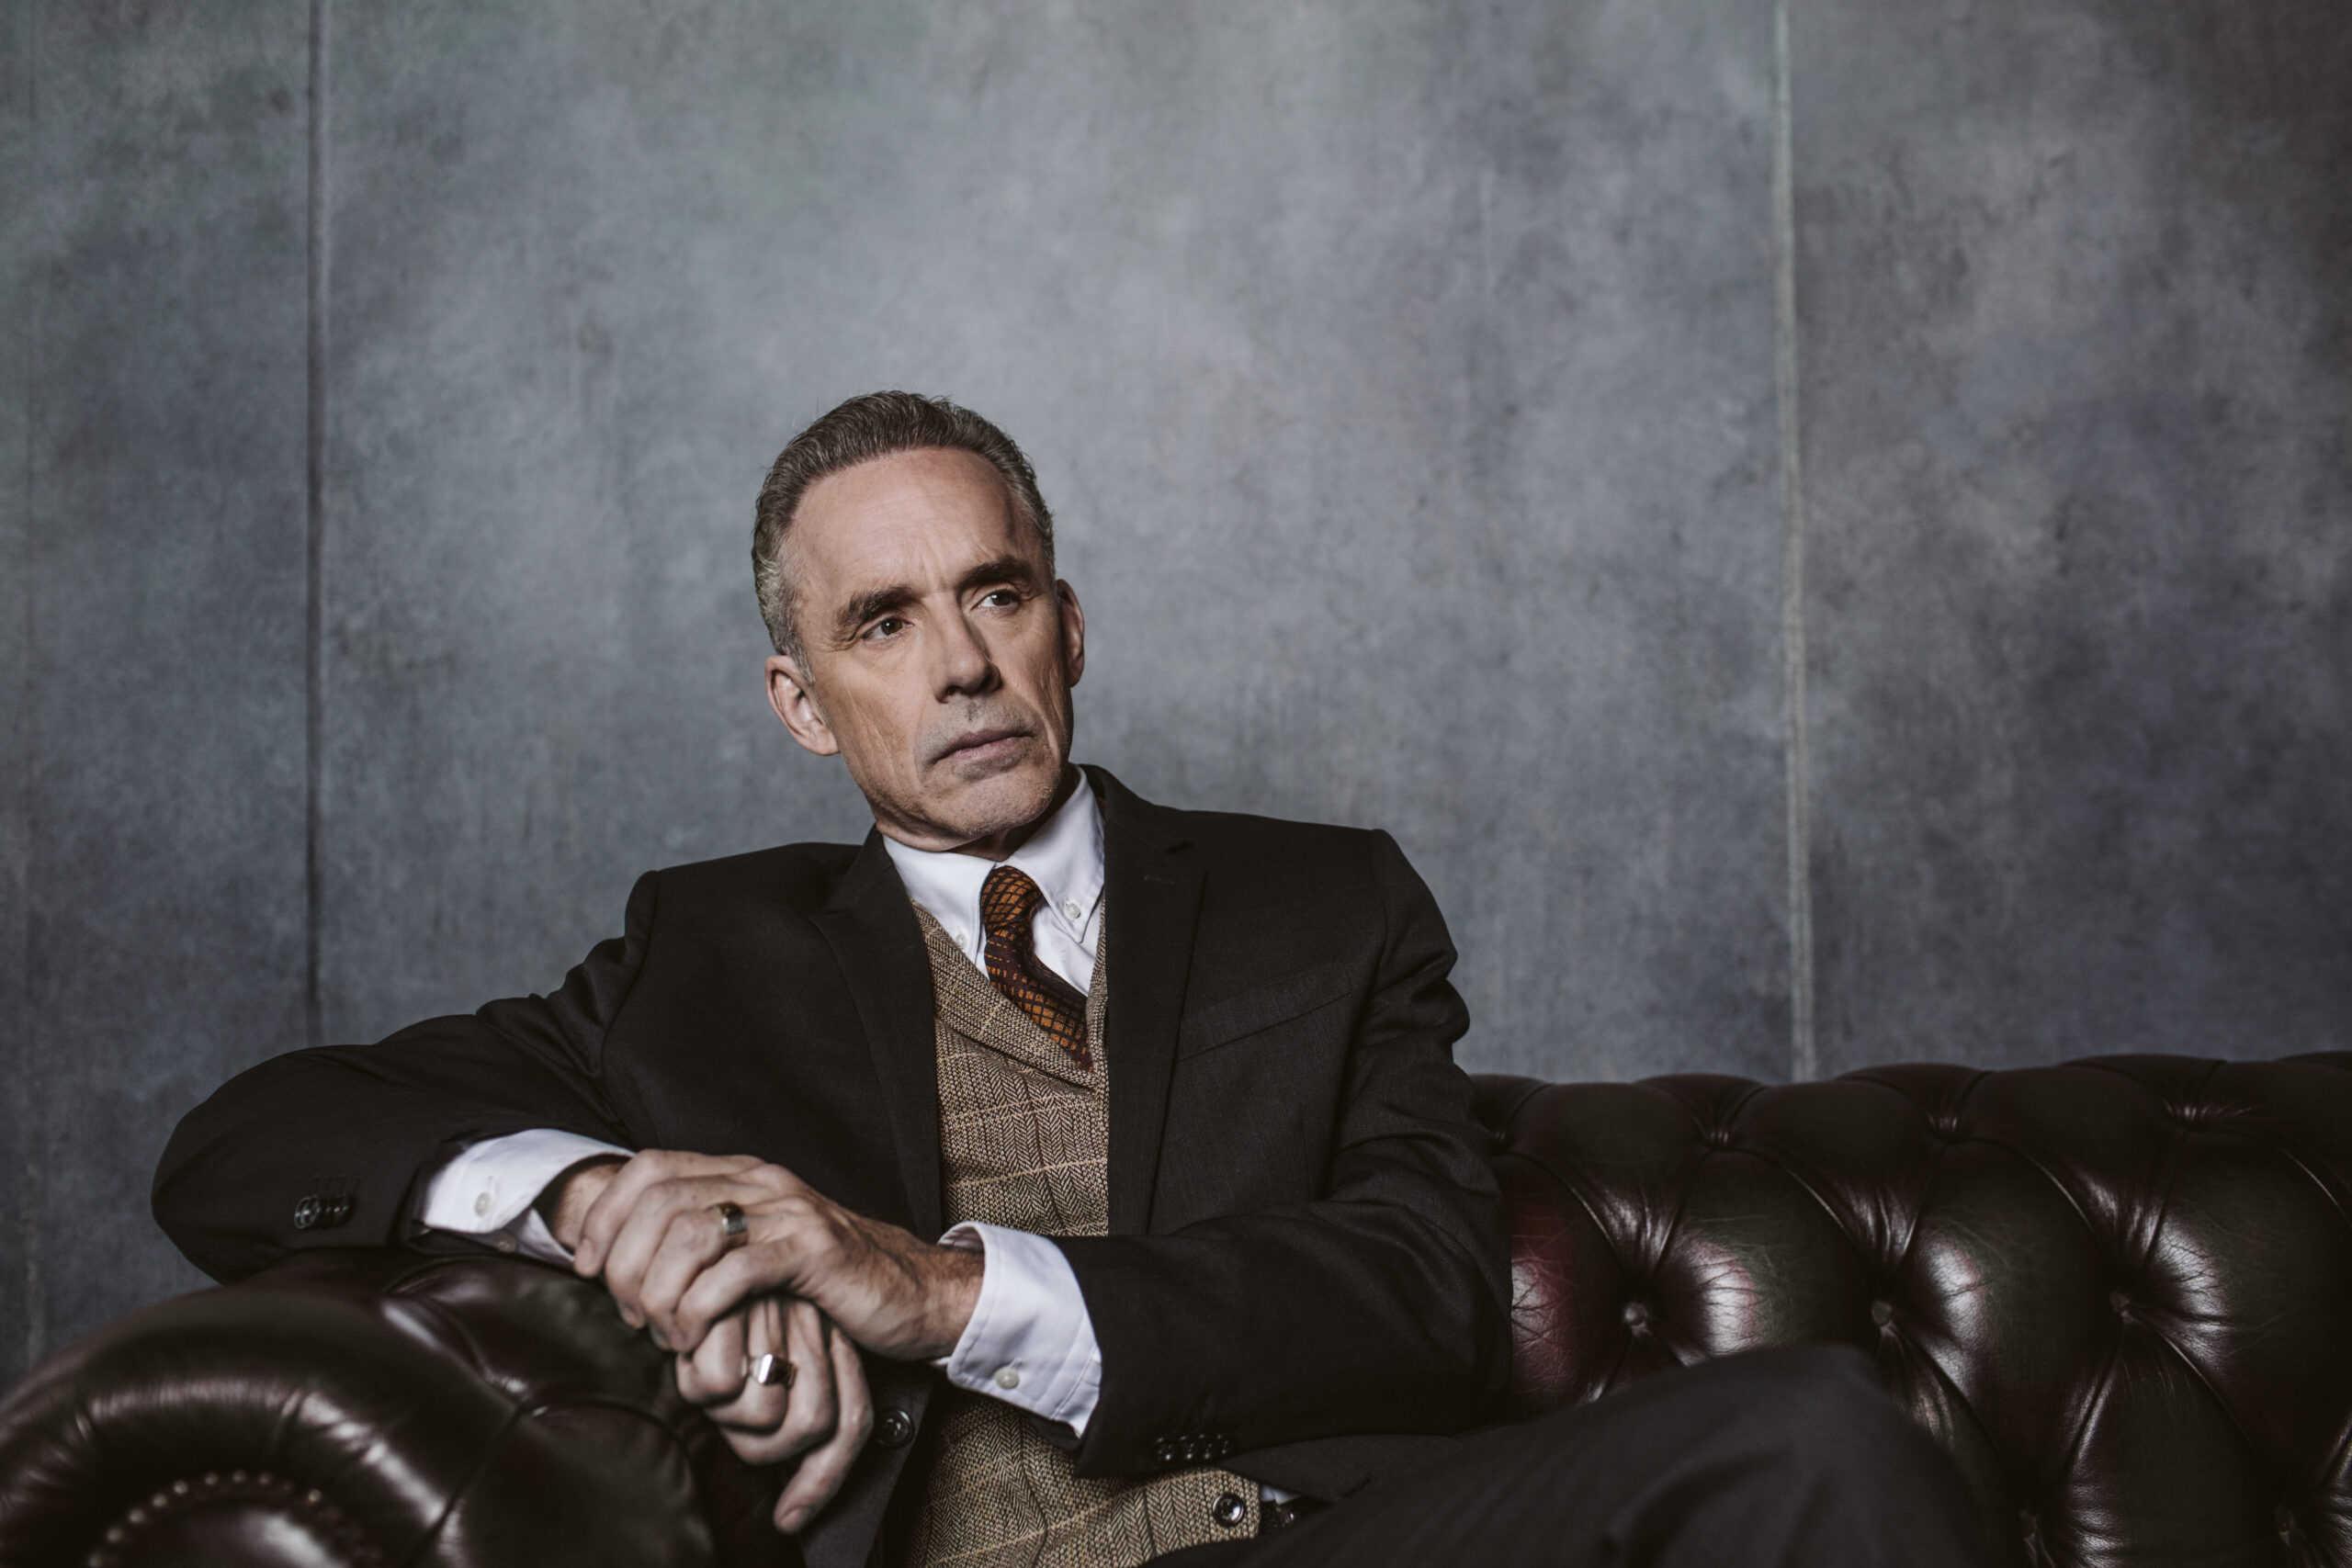 Jordan Peterson Net Worth - How Much Is The Controversial Psychologist Worth?